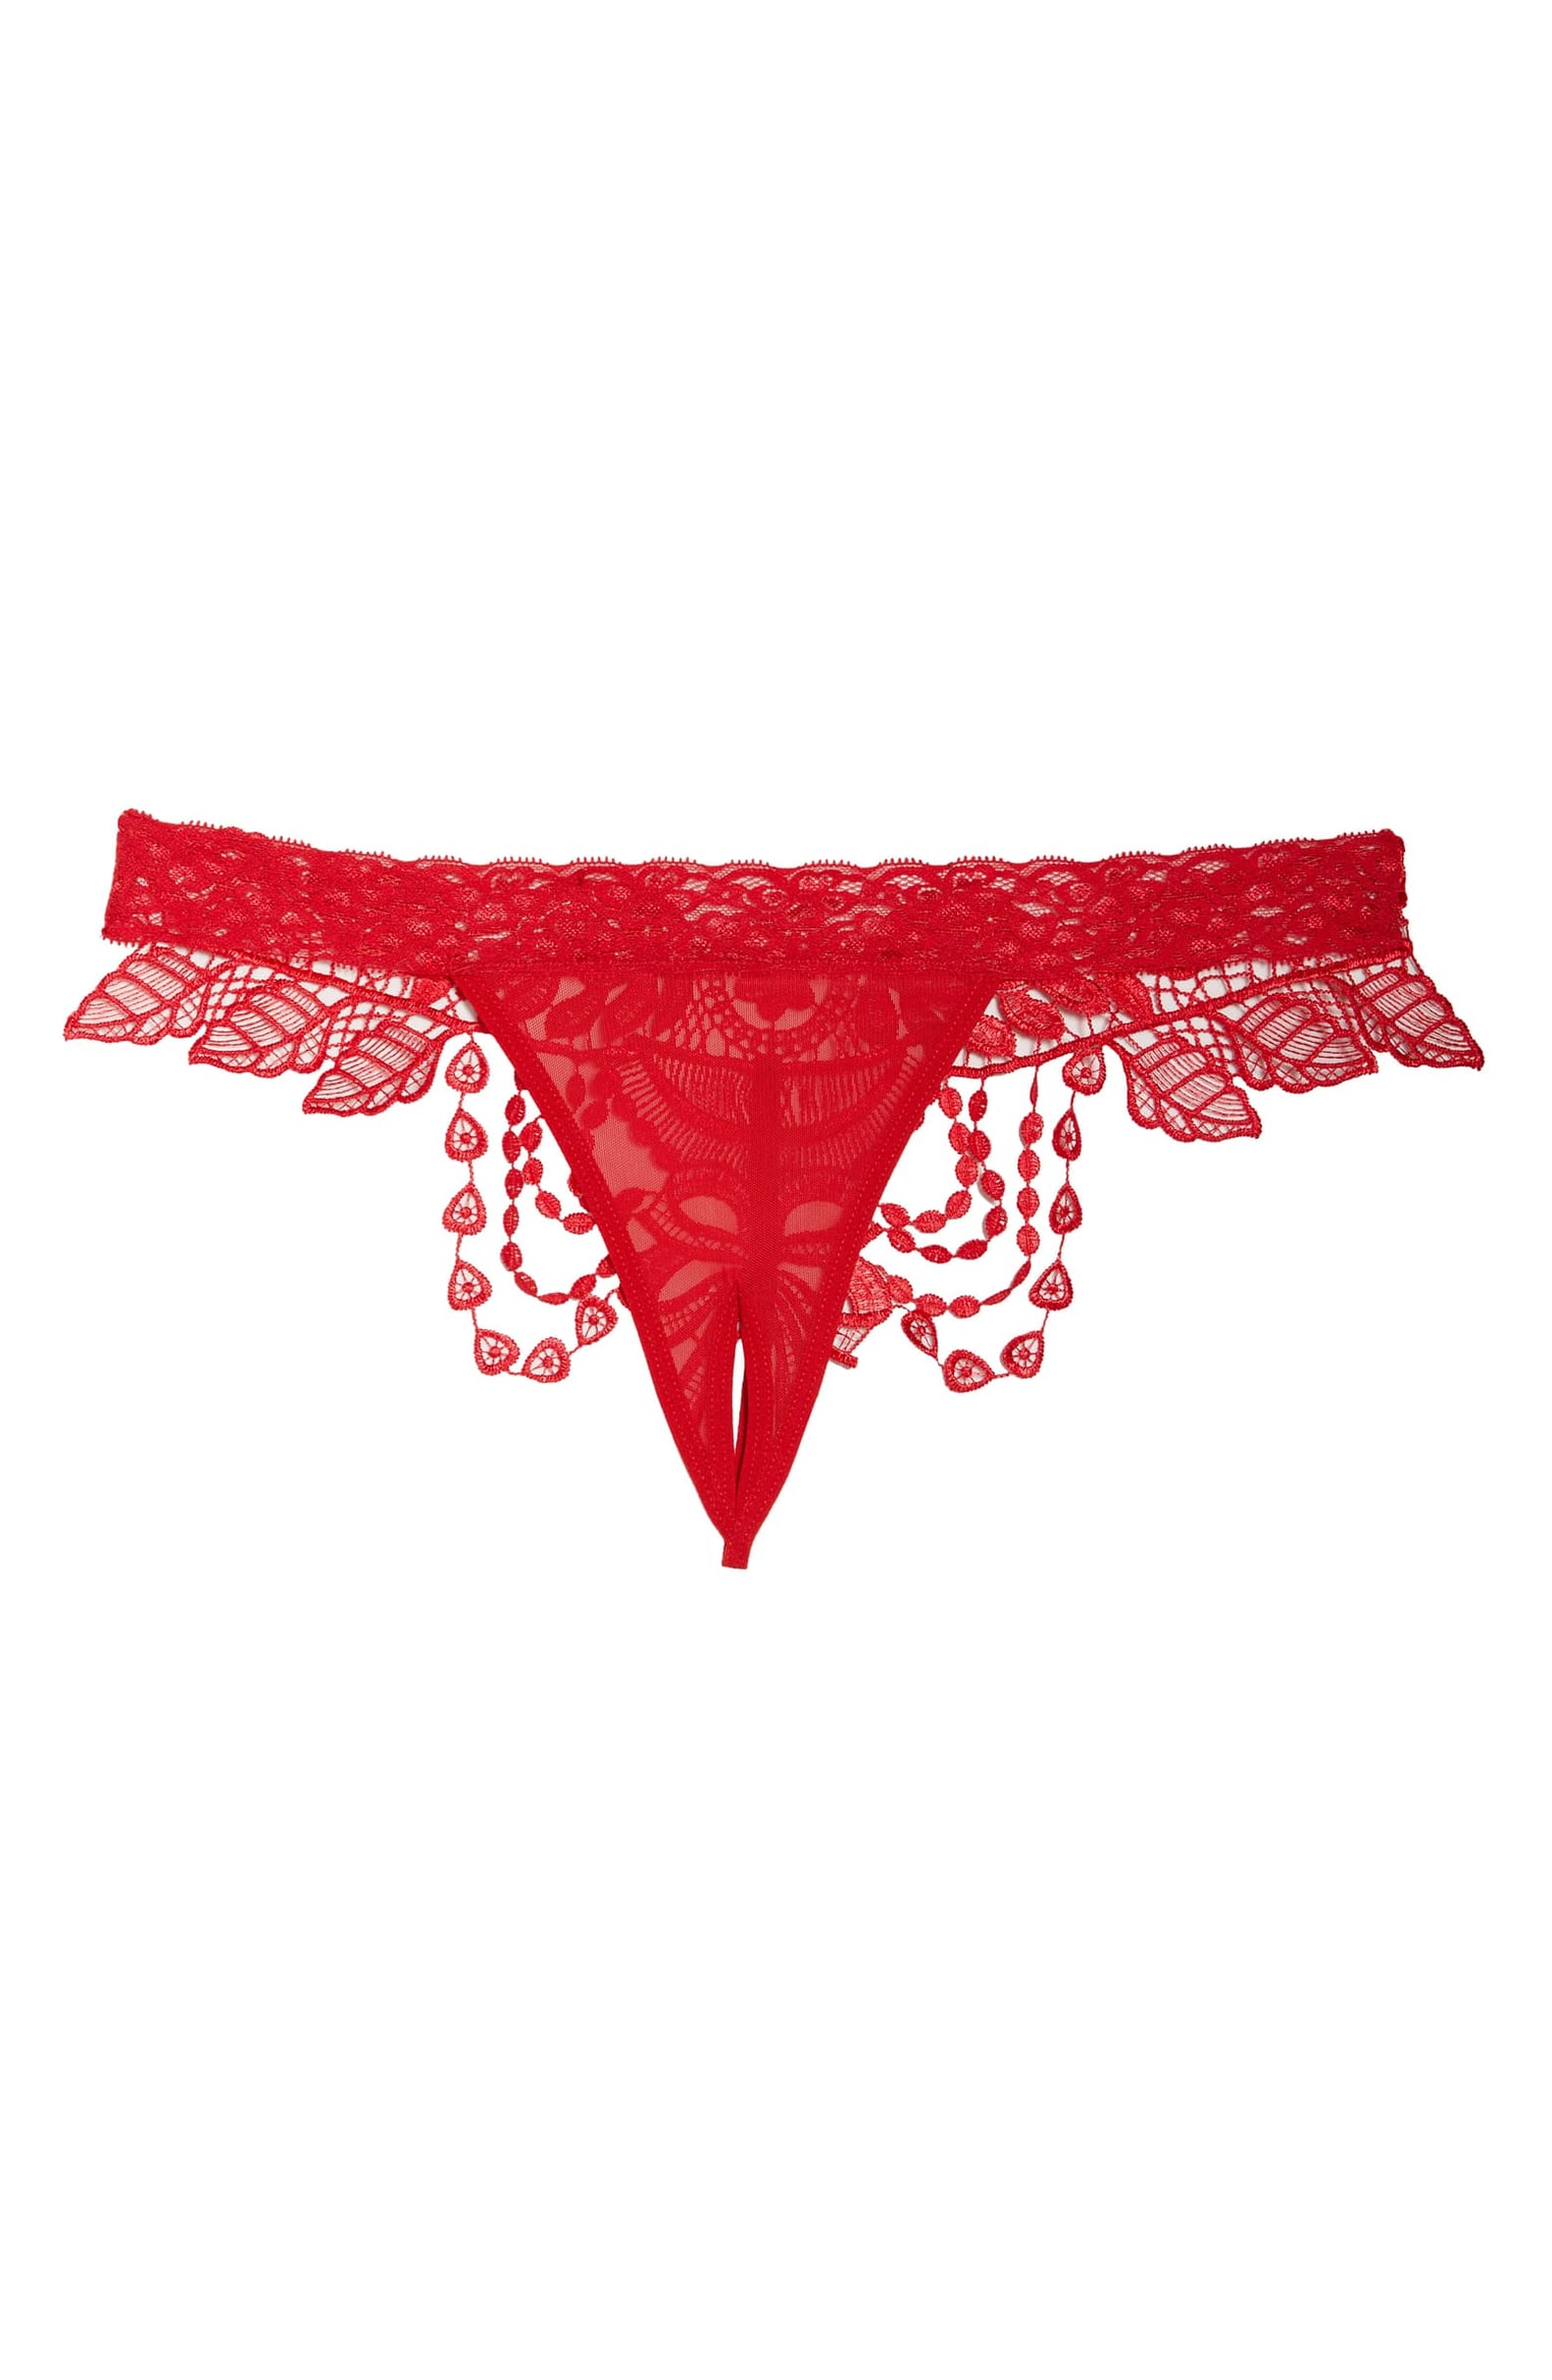 15 Pairs of Cute and Sexy Crotchless Panties | POPSUGAR Love & Sex